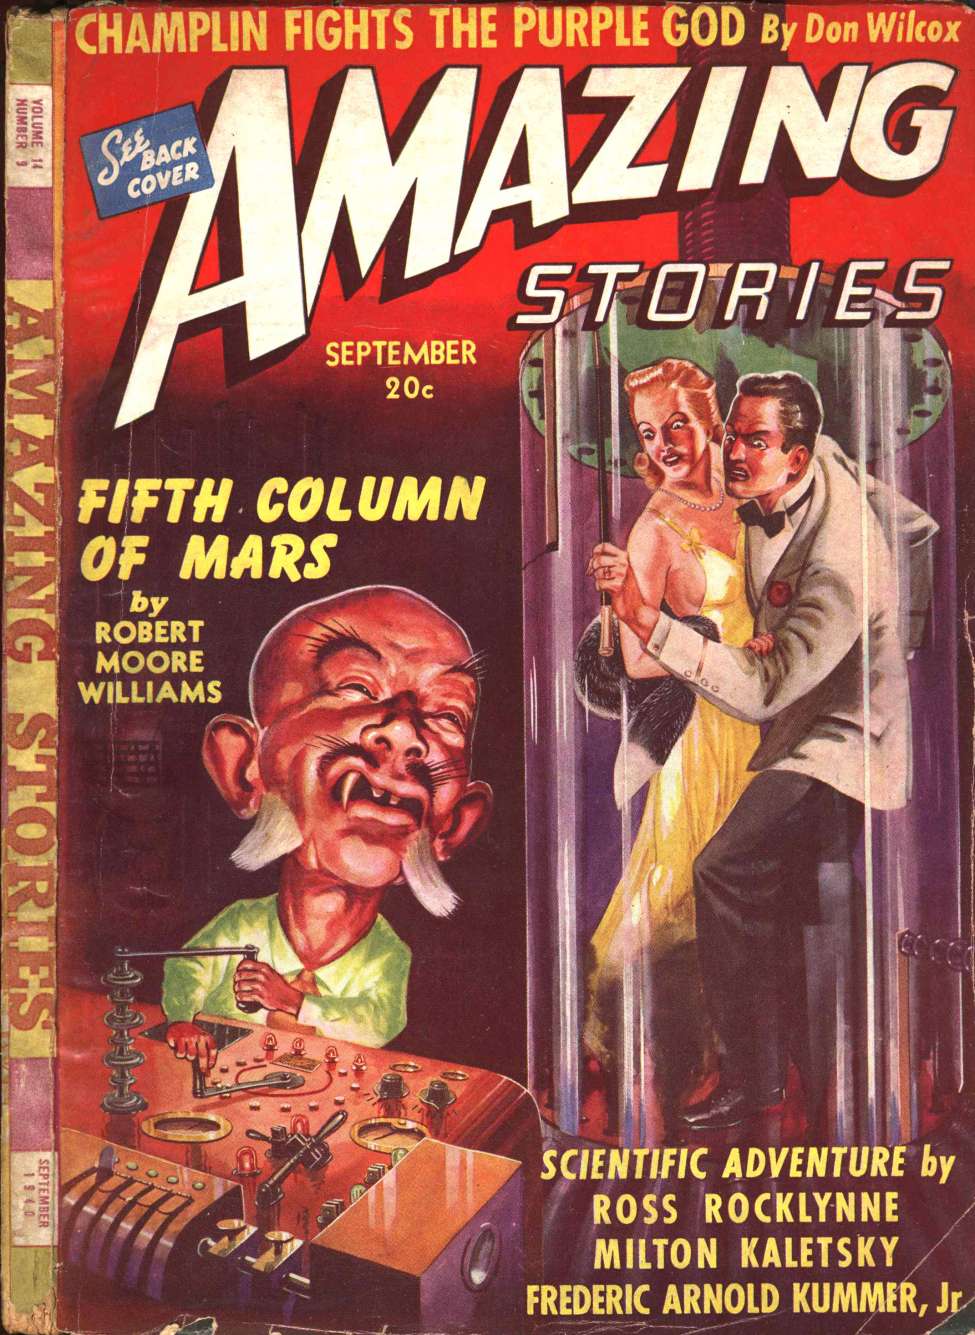 Comic Book Cover For Amazing Stories v14 9 - Fifth Column of Mars - Robert Moore Williams